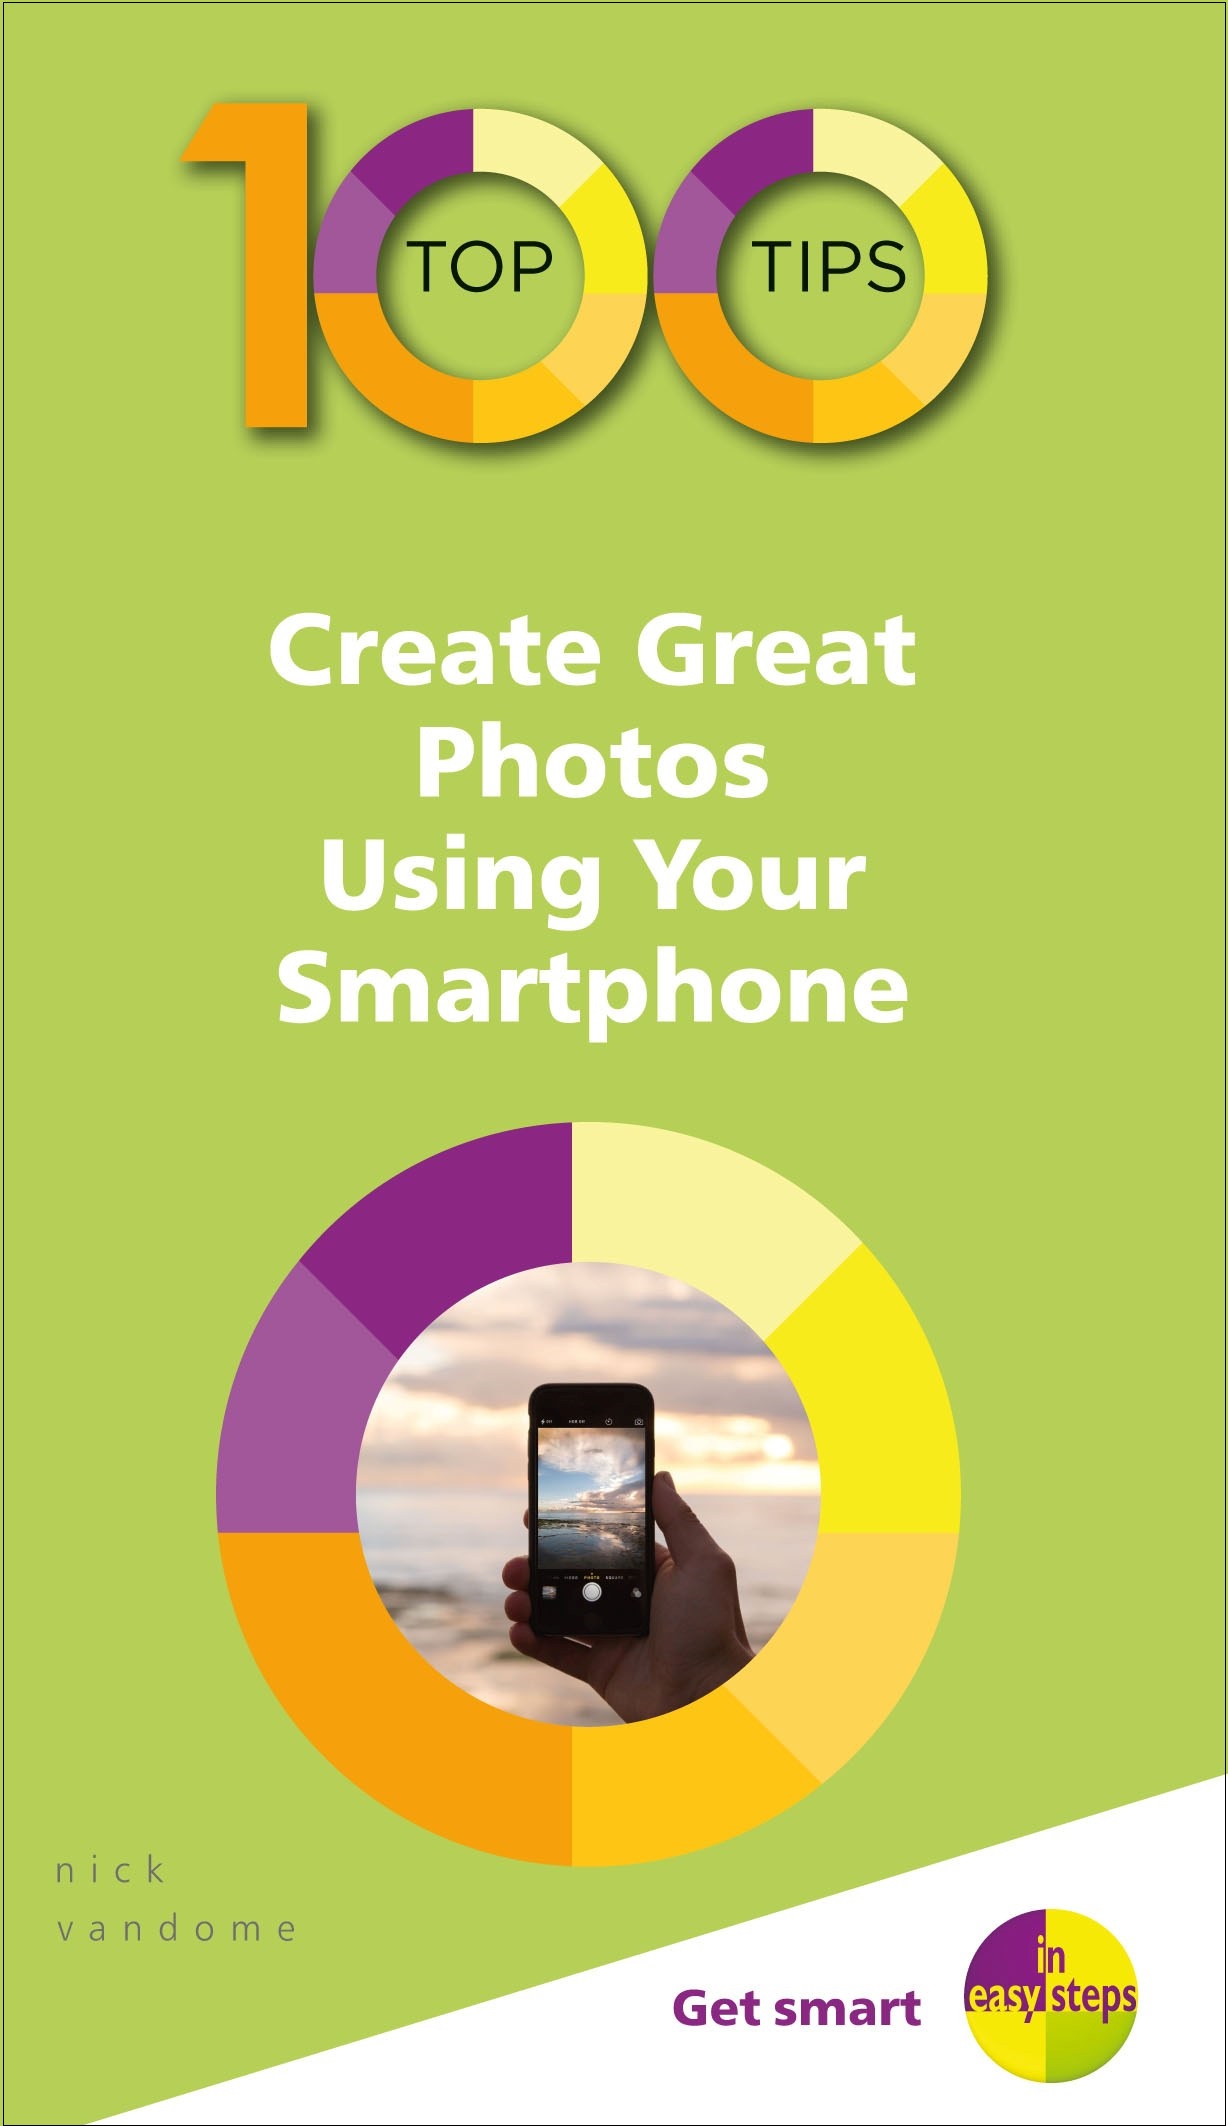 100 Top Tips - Create Great Photos Using Your Smartphone